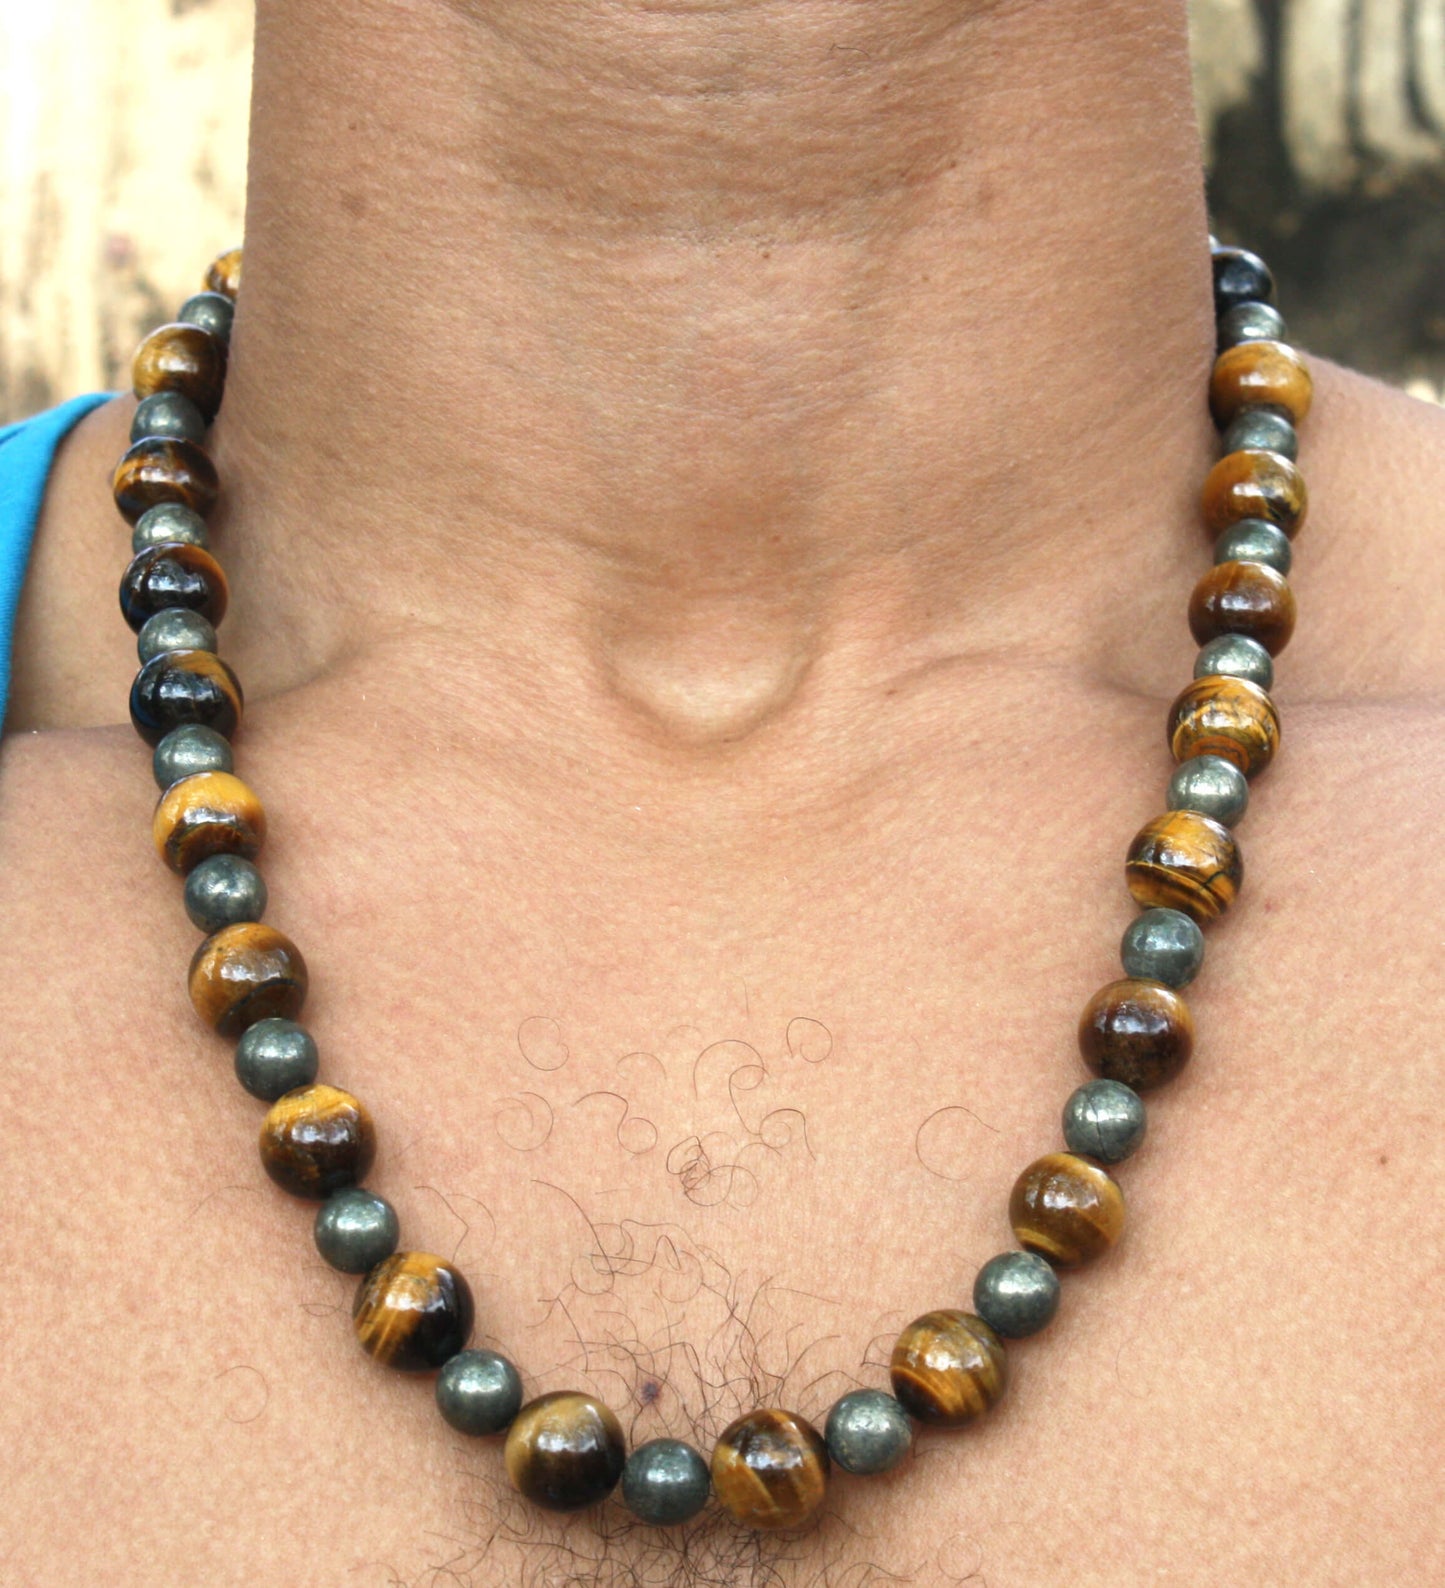 24 inch Tiger Eye and Pyrite Necklace